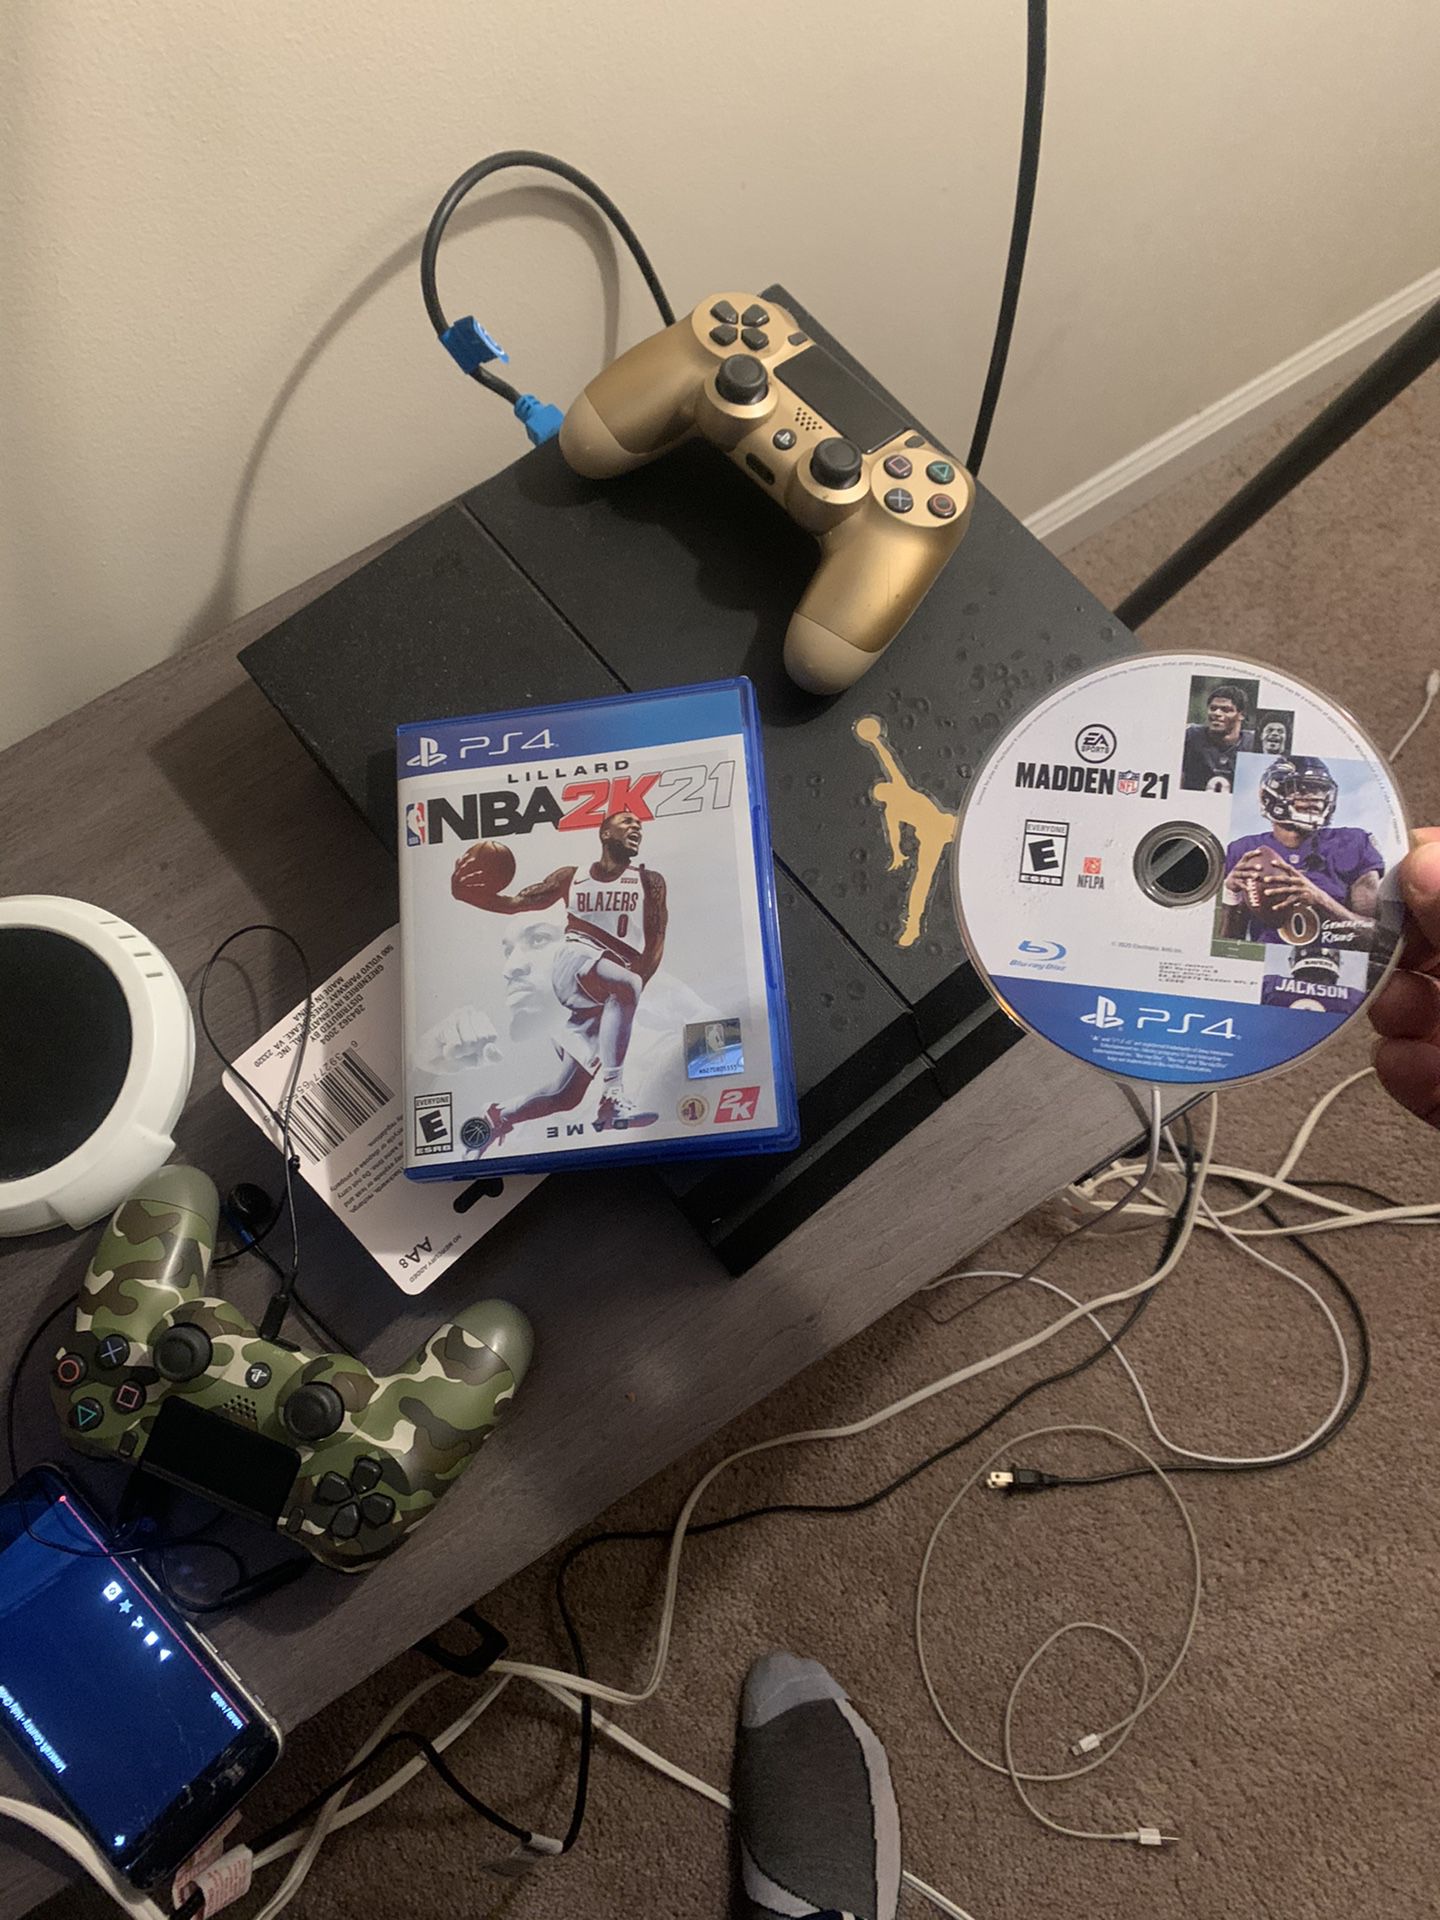 PS4 2 controllers with 2k and madden 21